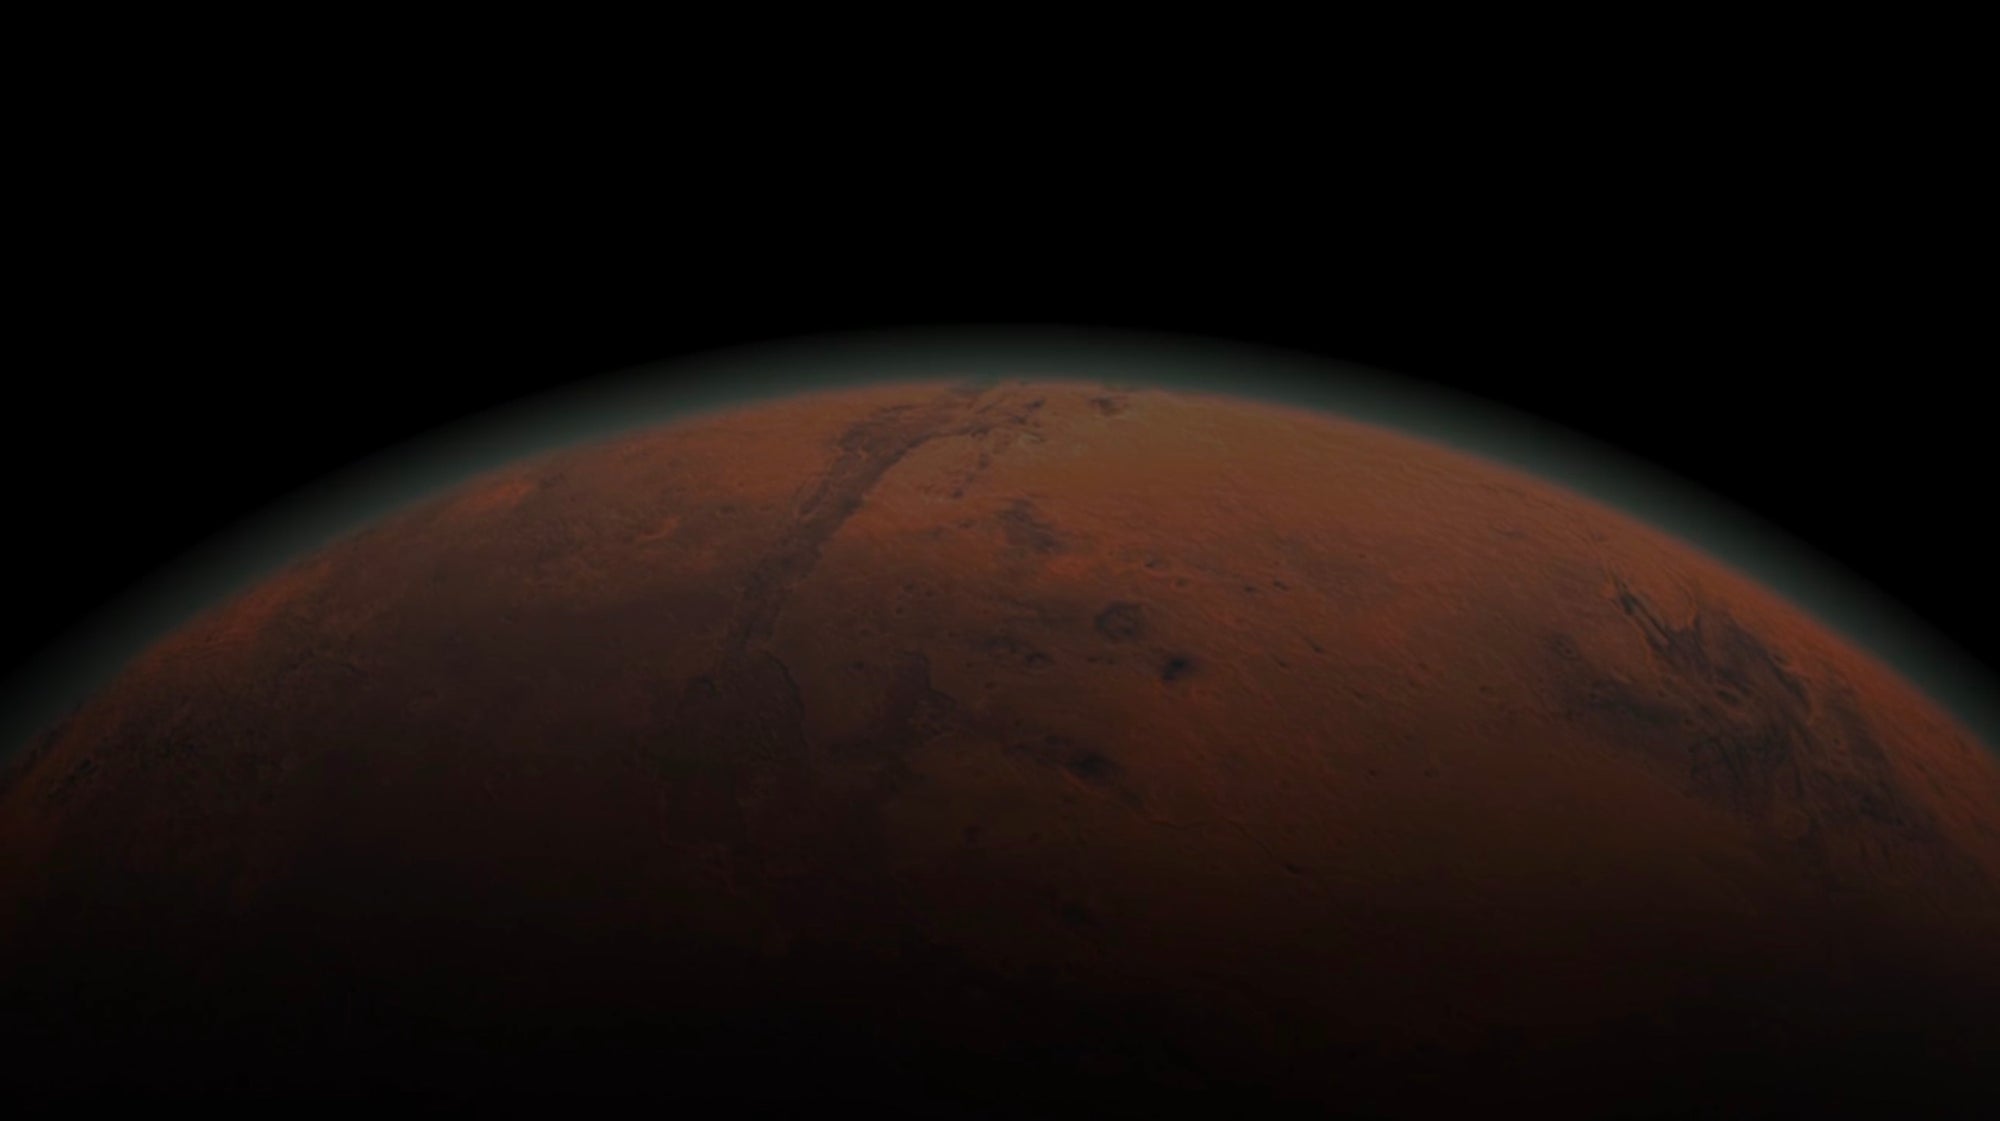 Flying over the Martian atmosphere